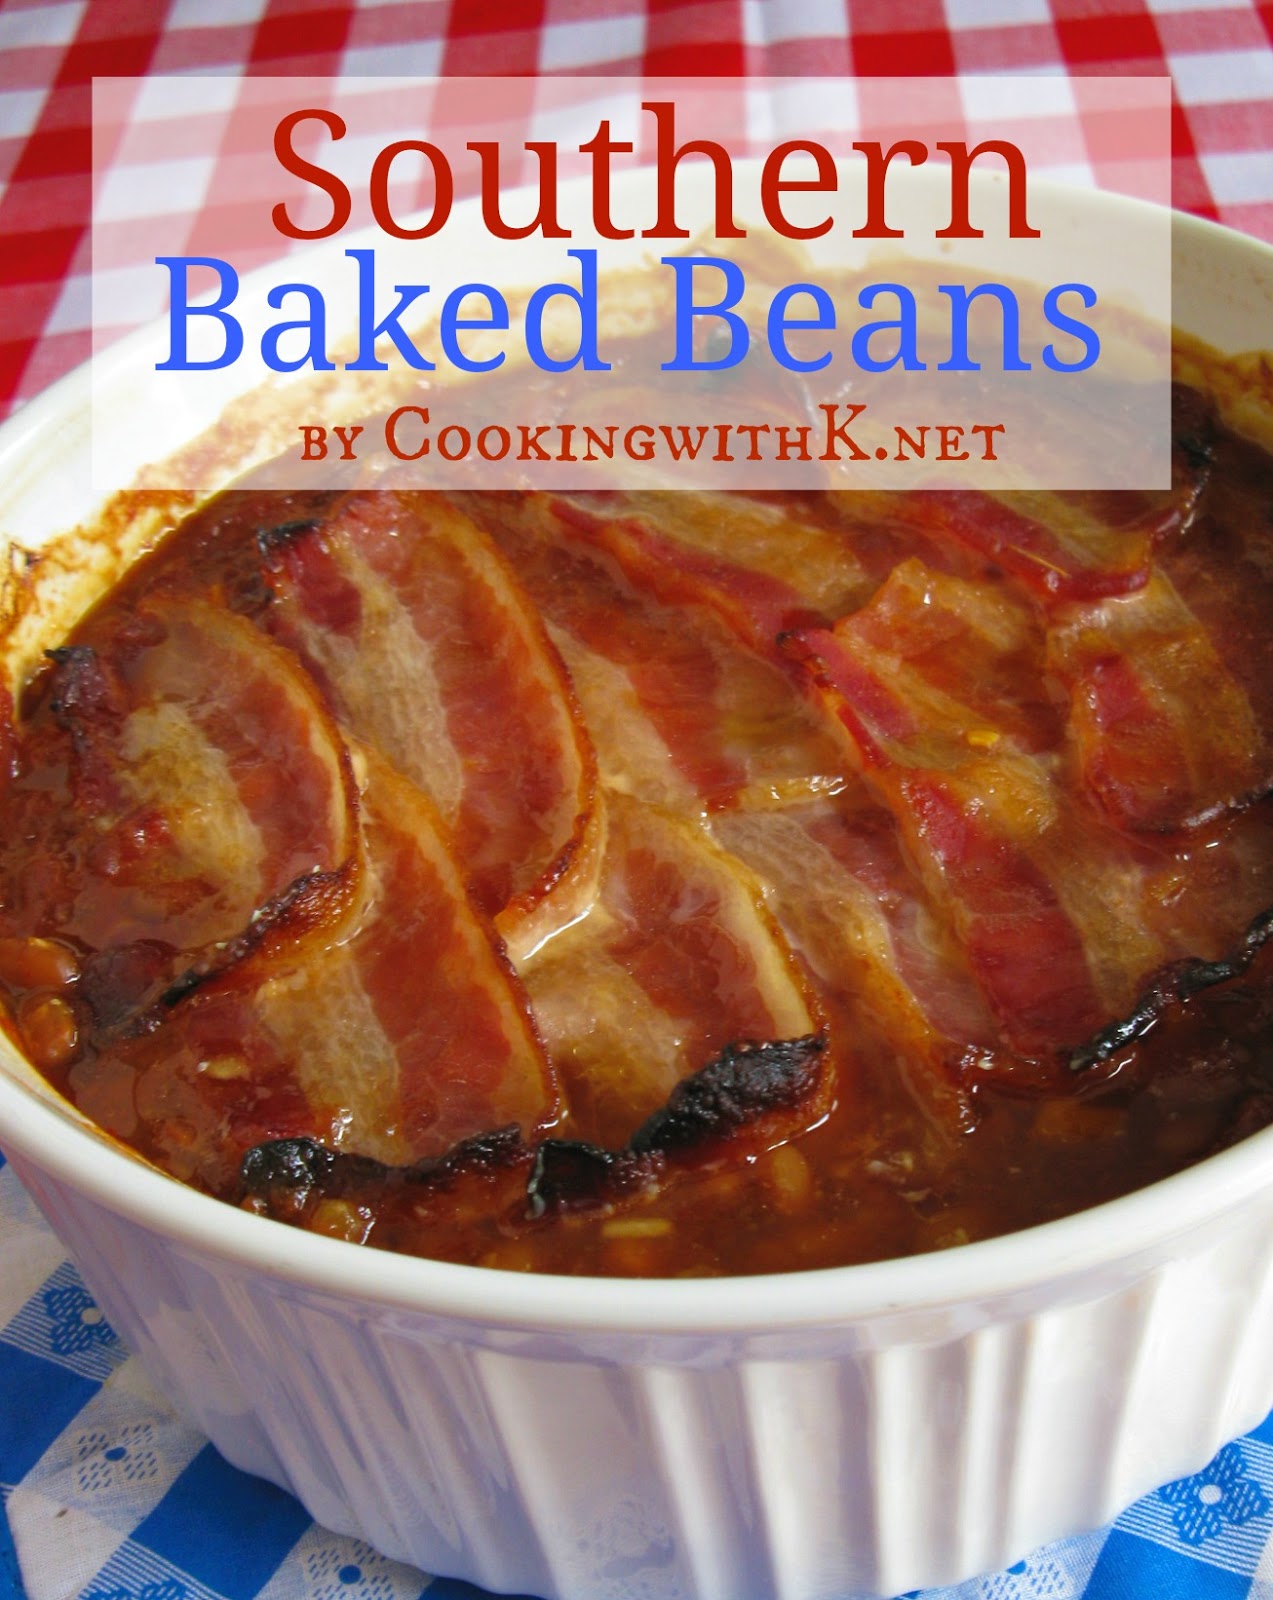 Cooking with K: Mama's Southern Style Baked Beans {Granny's Recipes}